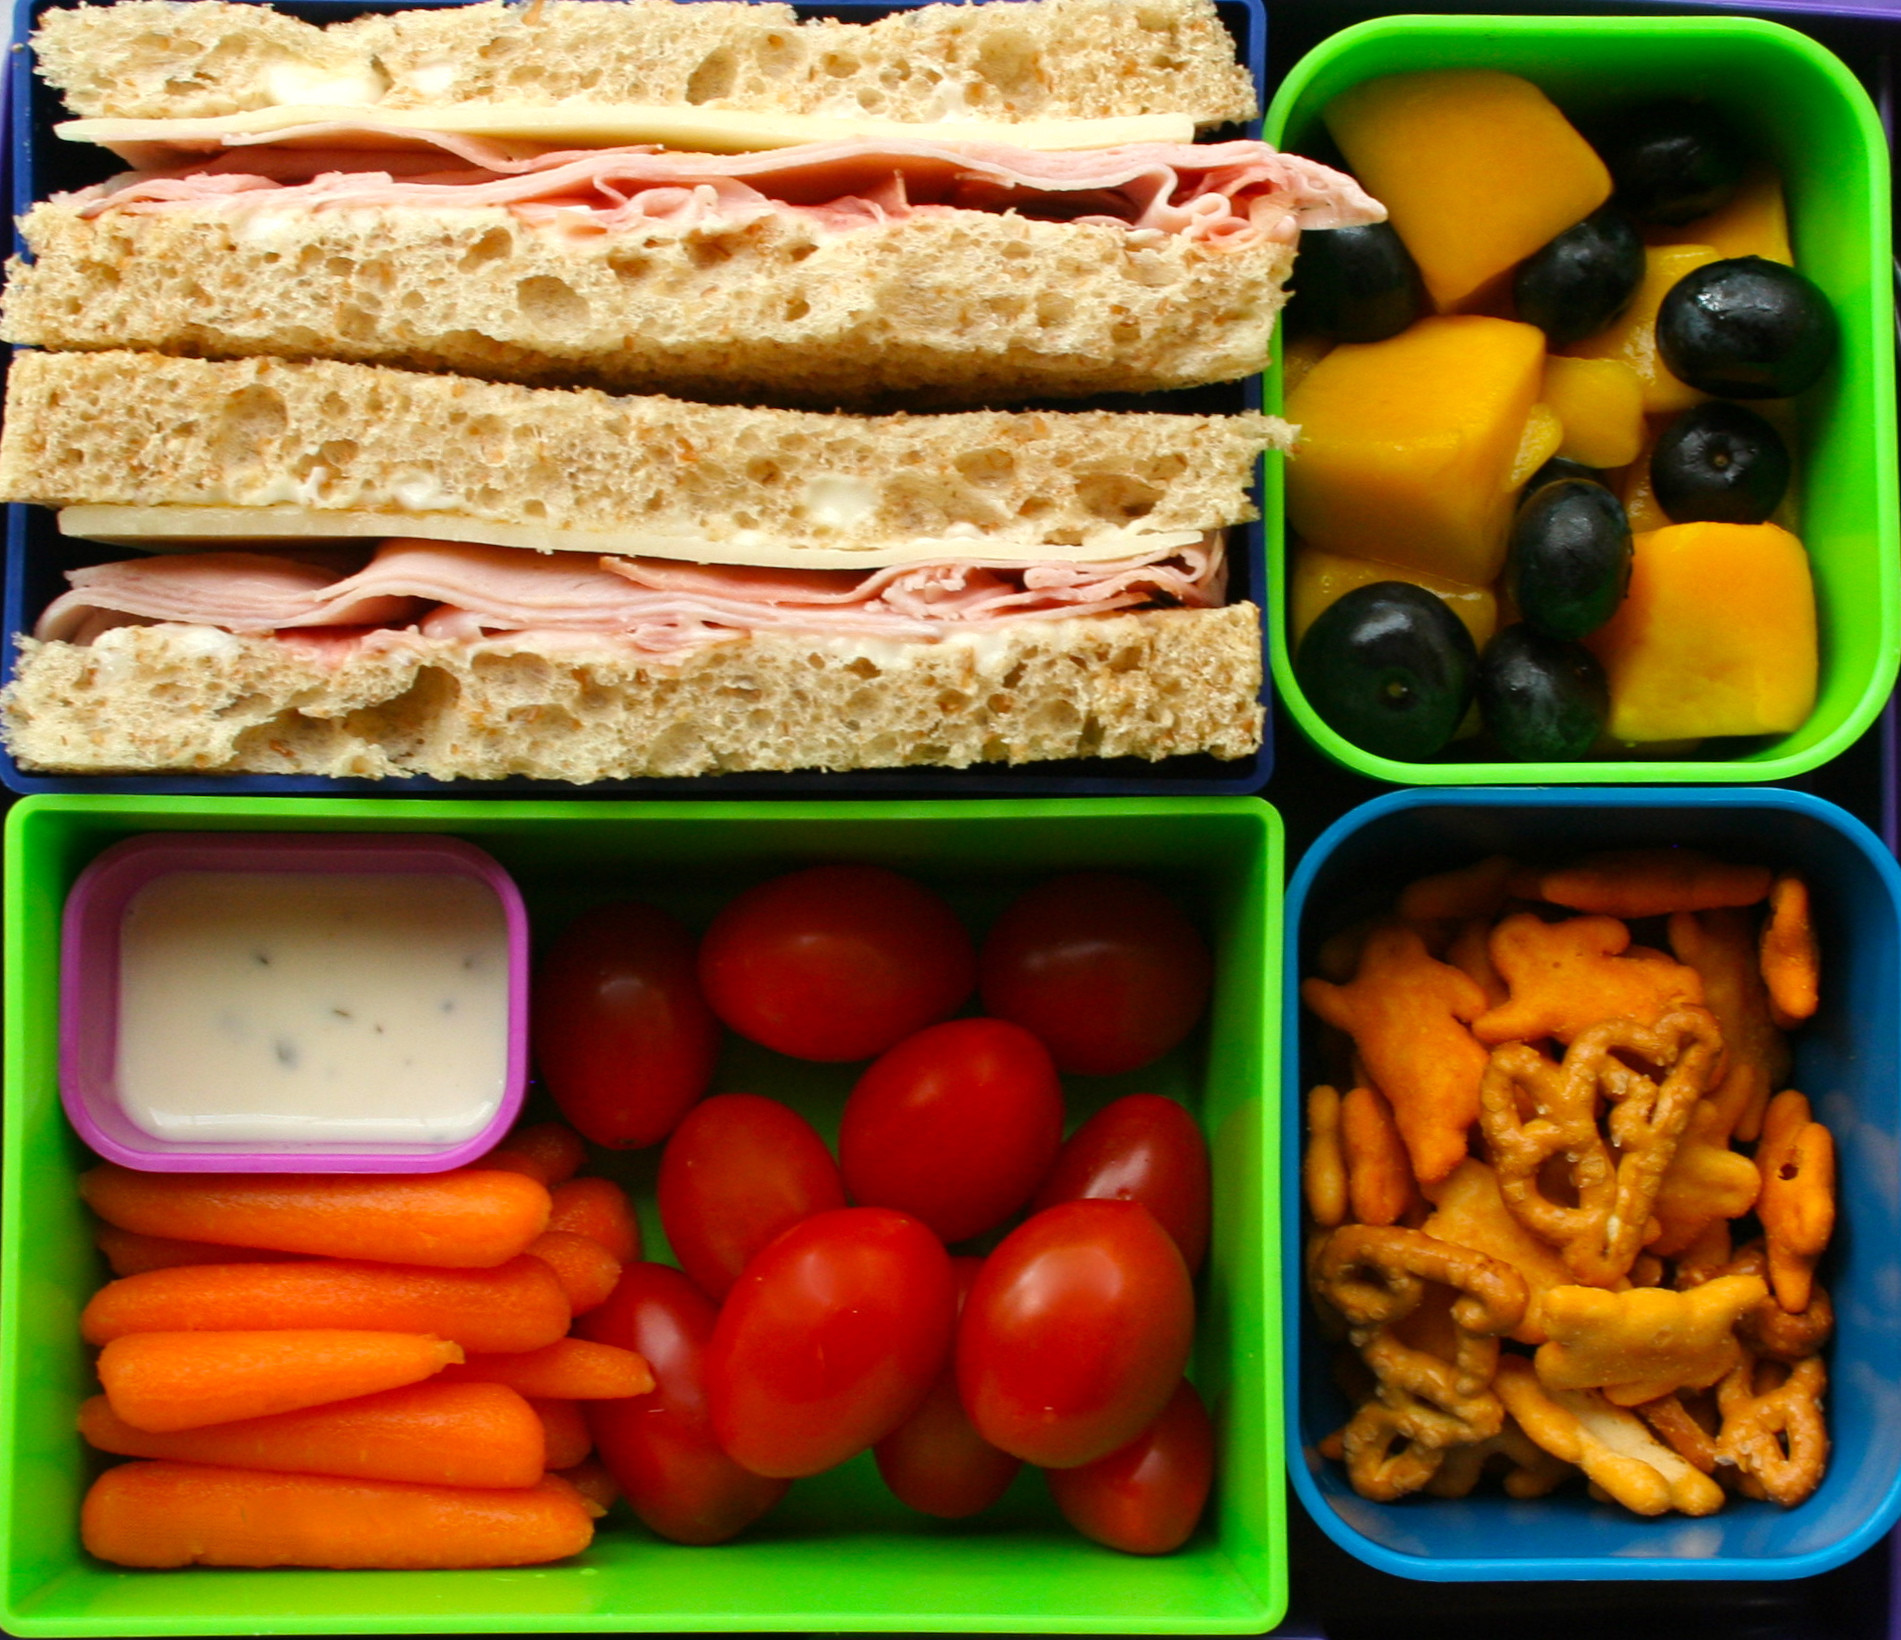 Healthy Homemade Lunches
 Top 3 healthy lunches